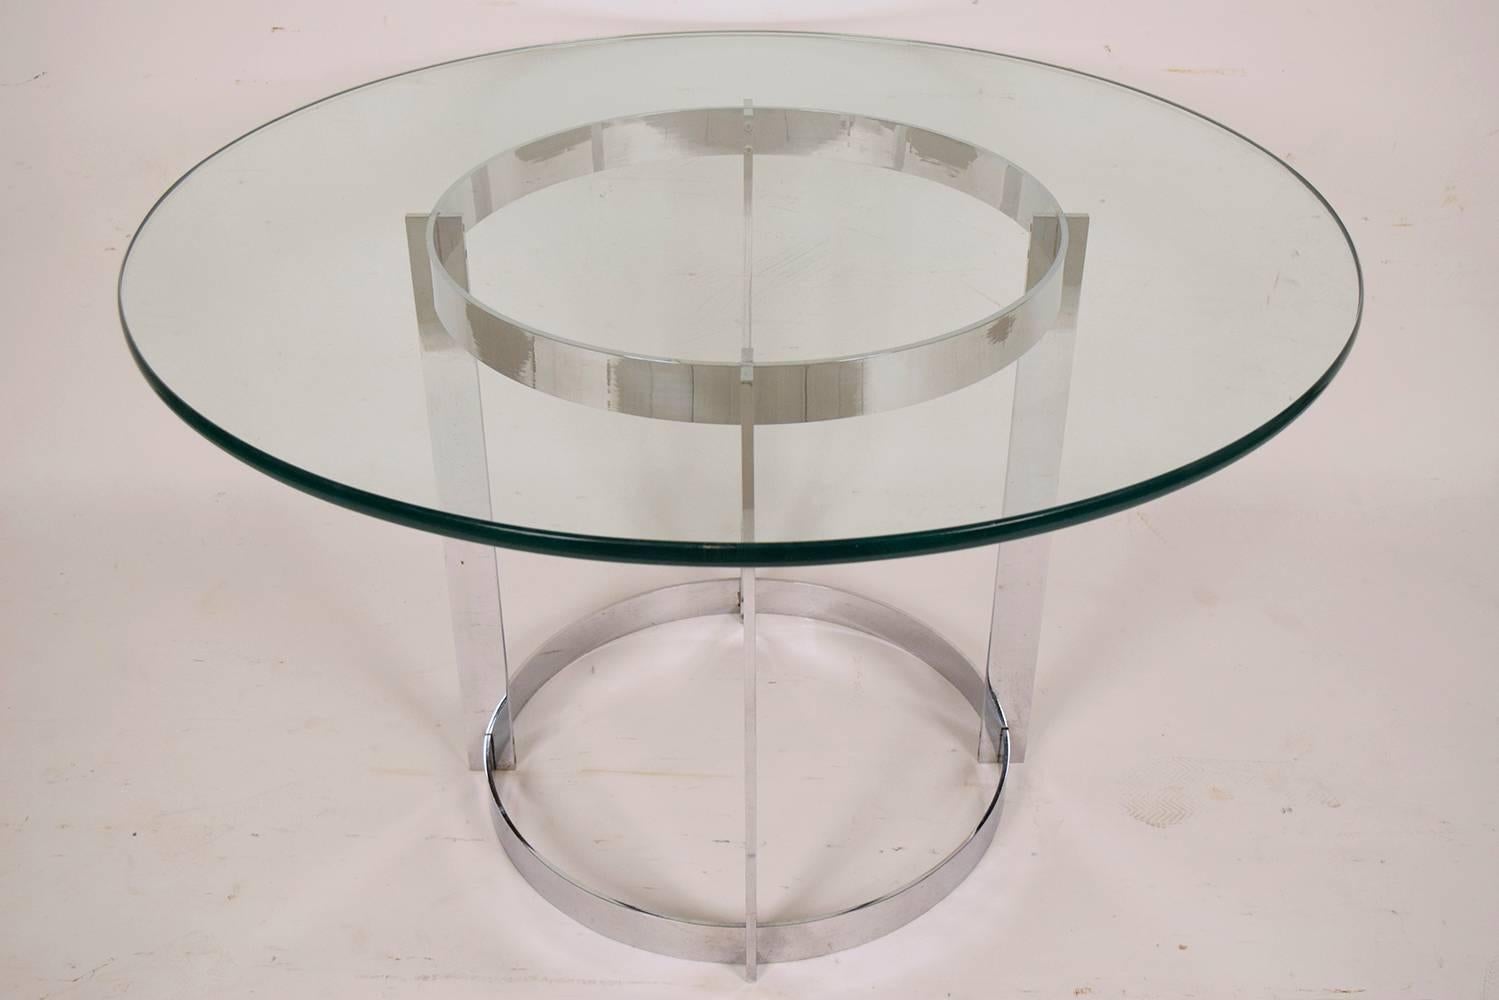 This elegant Mid-Century Modern-style Dining table is equipped with a chrome circular base. The sleek chrome frame is in the shape of a geometrical cylinder. The center table has a thick circular glass that rests upon the base. This center table is